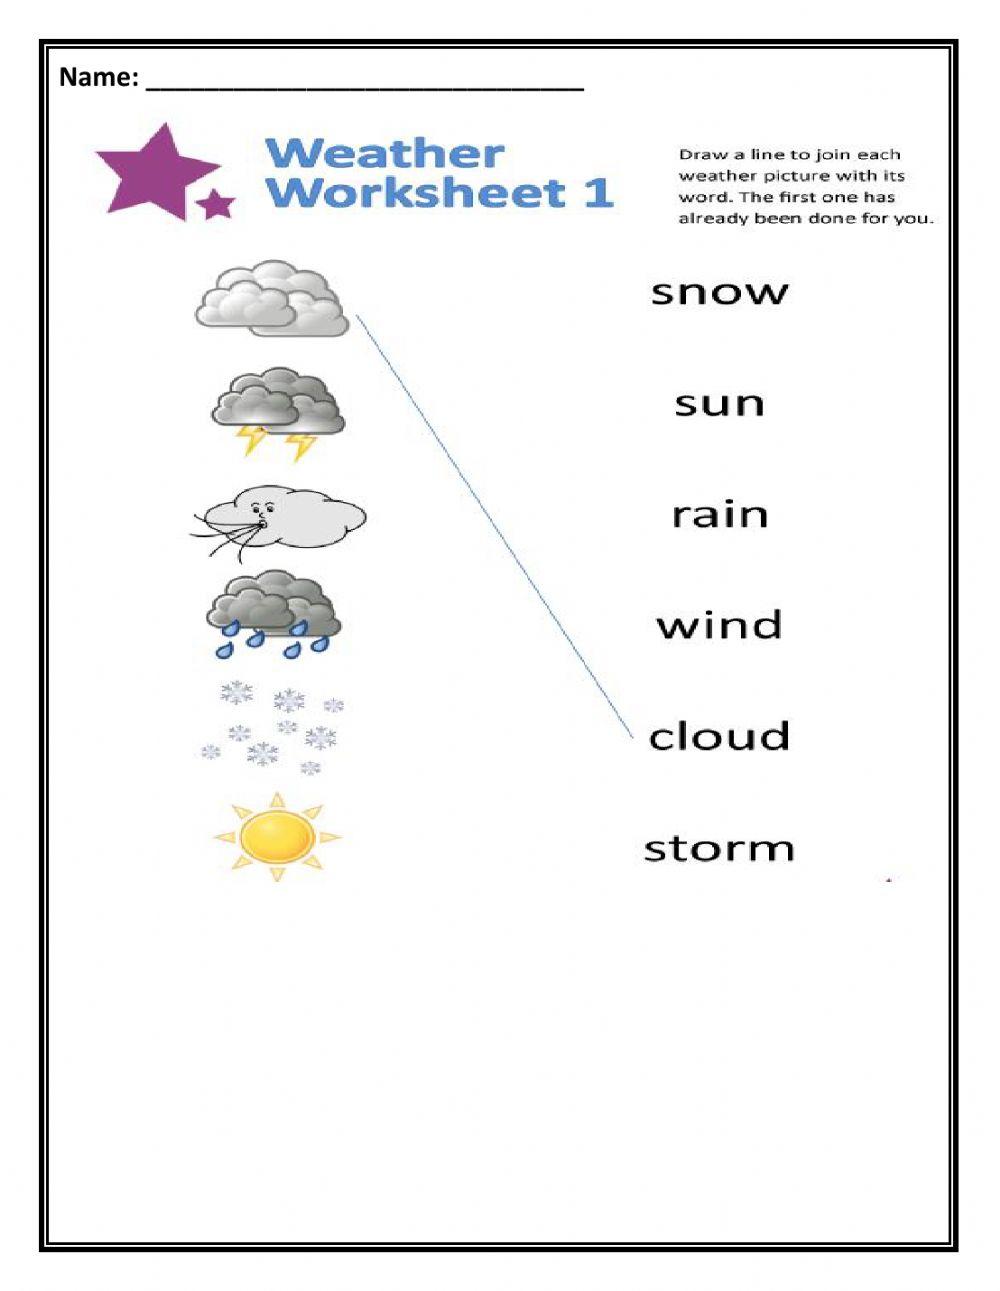 Weather WorkSheets